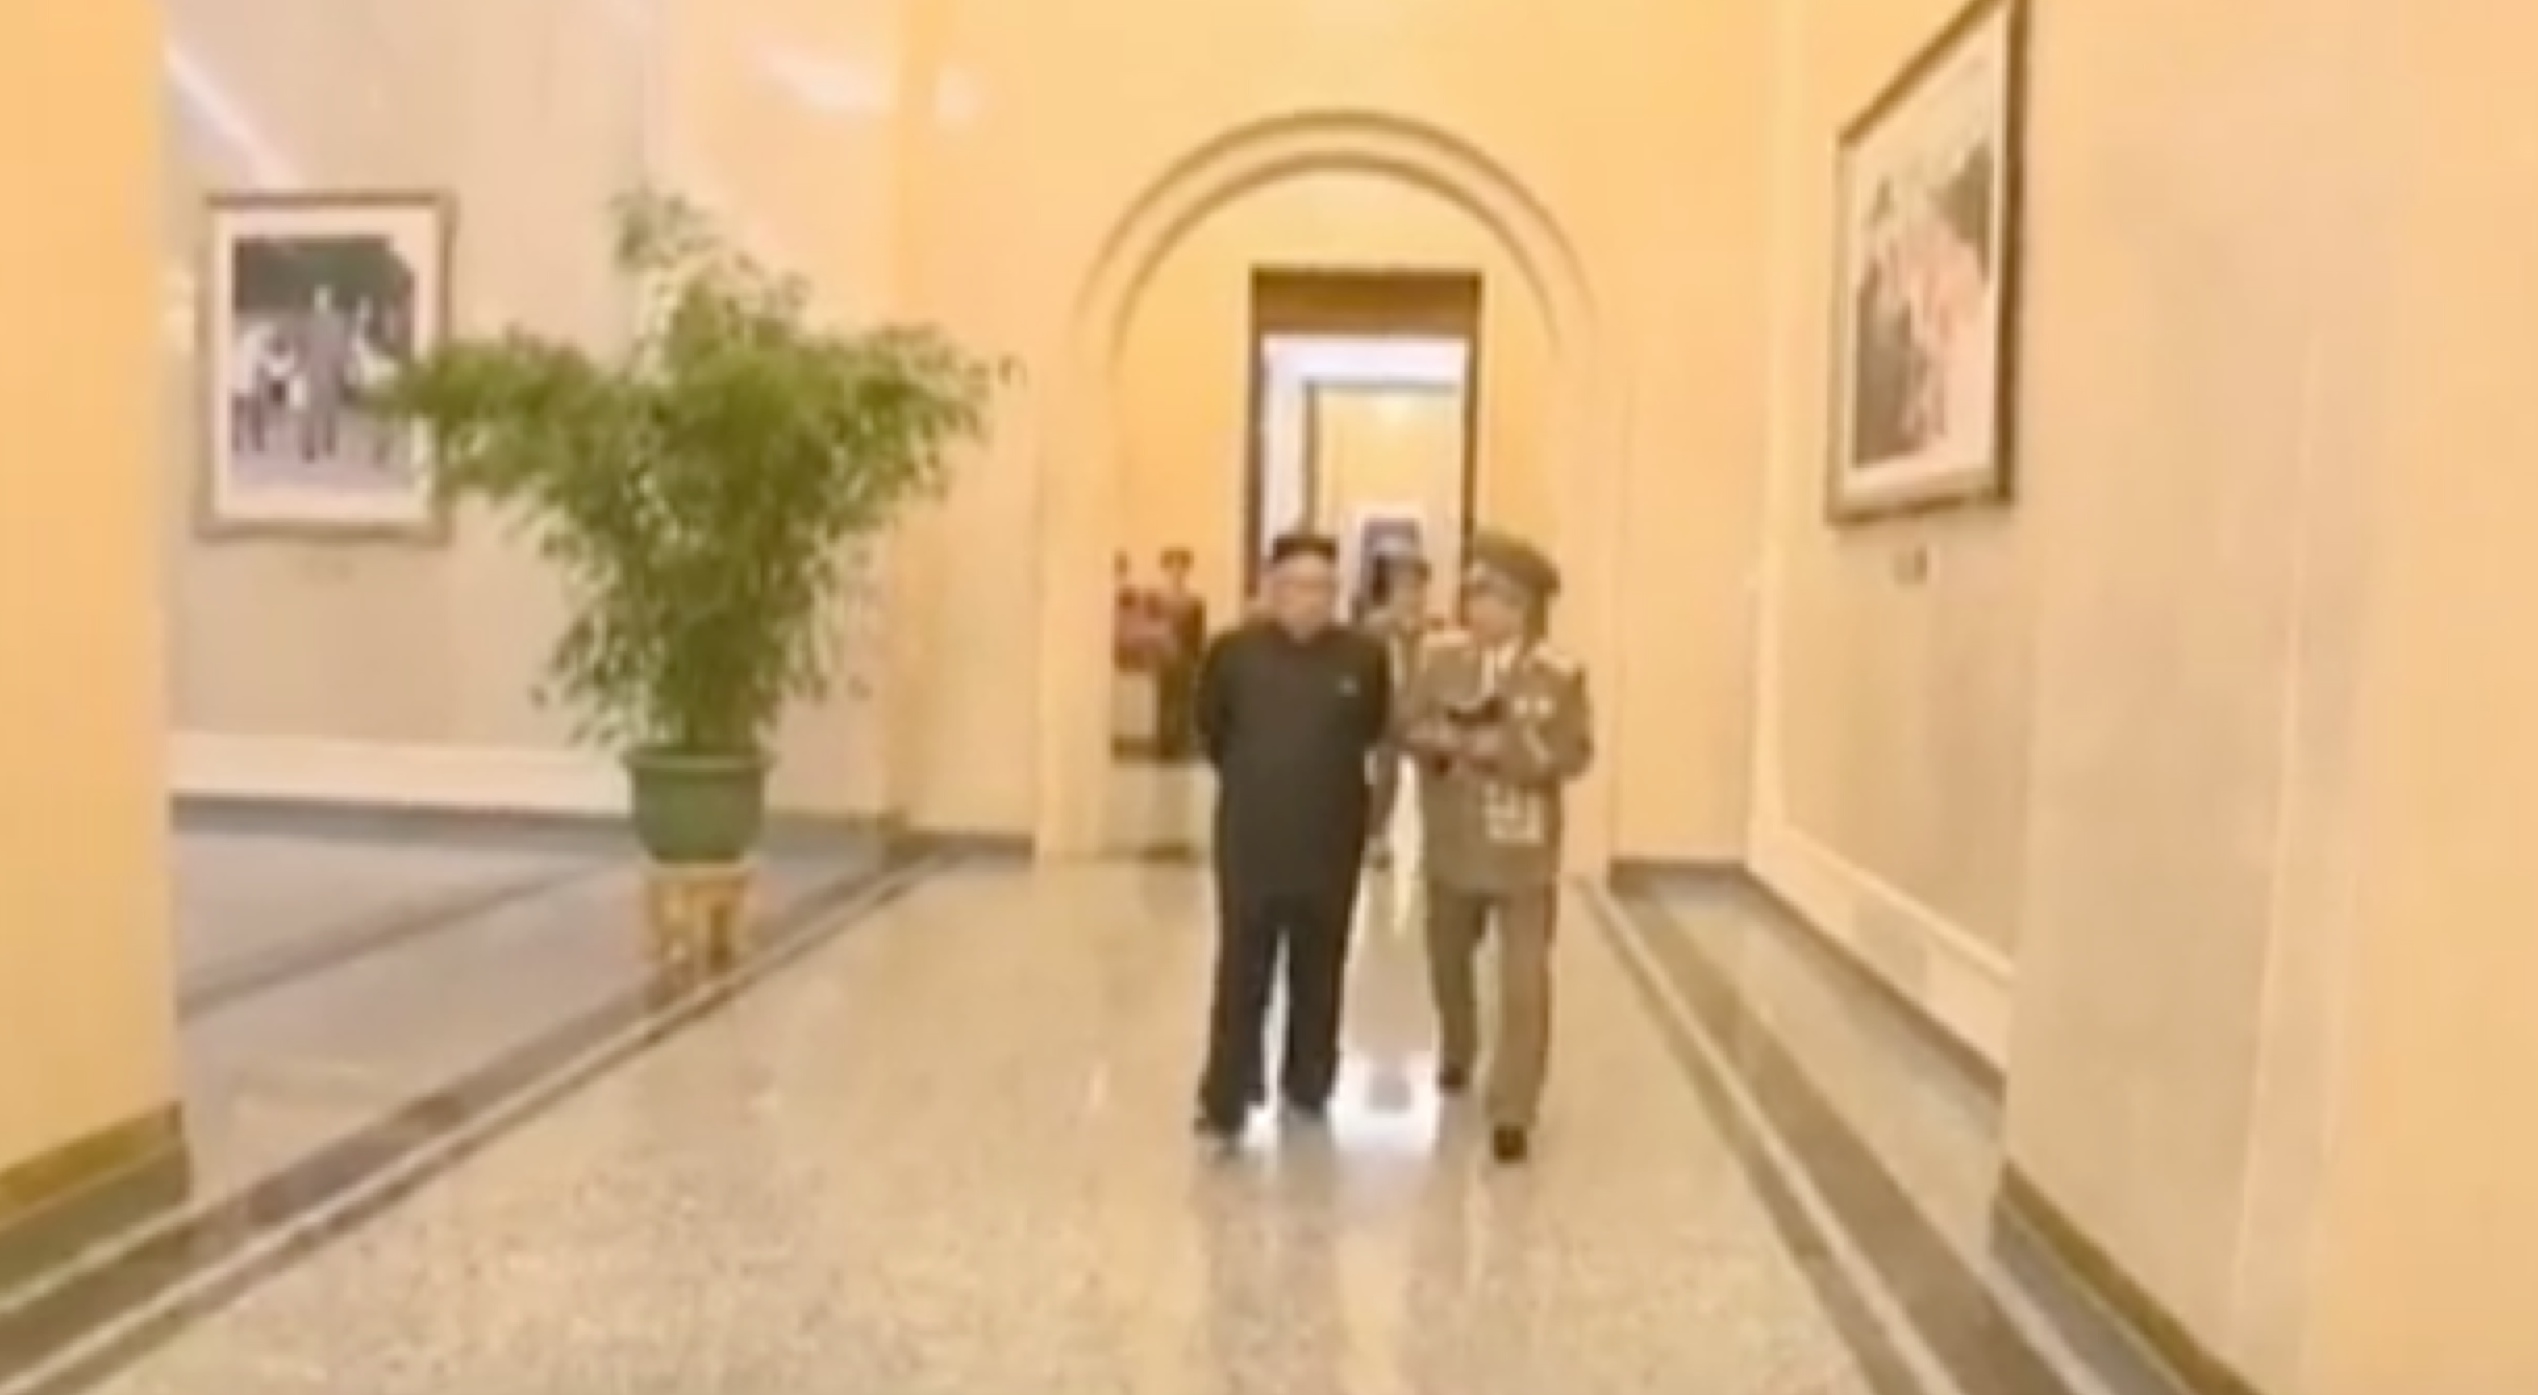 Kim Jong Un issues instructions to the director of the Ku'msusan Palace of the Sun on February 16, 2017 (Photo: Korean Central Television).